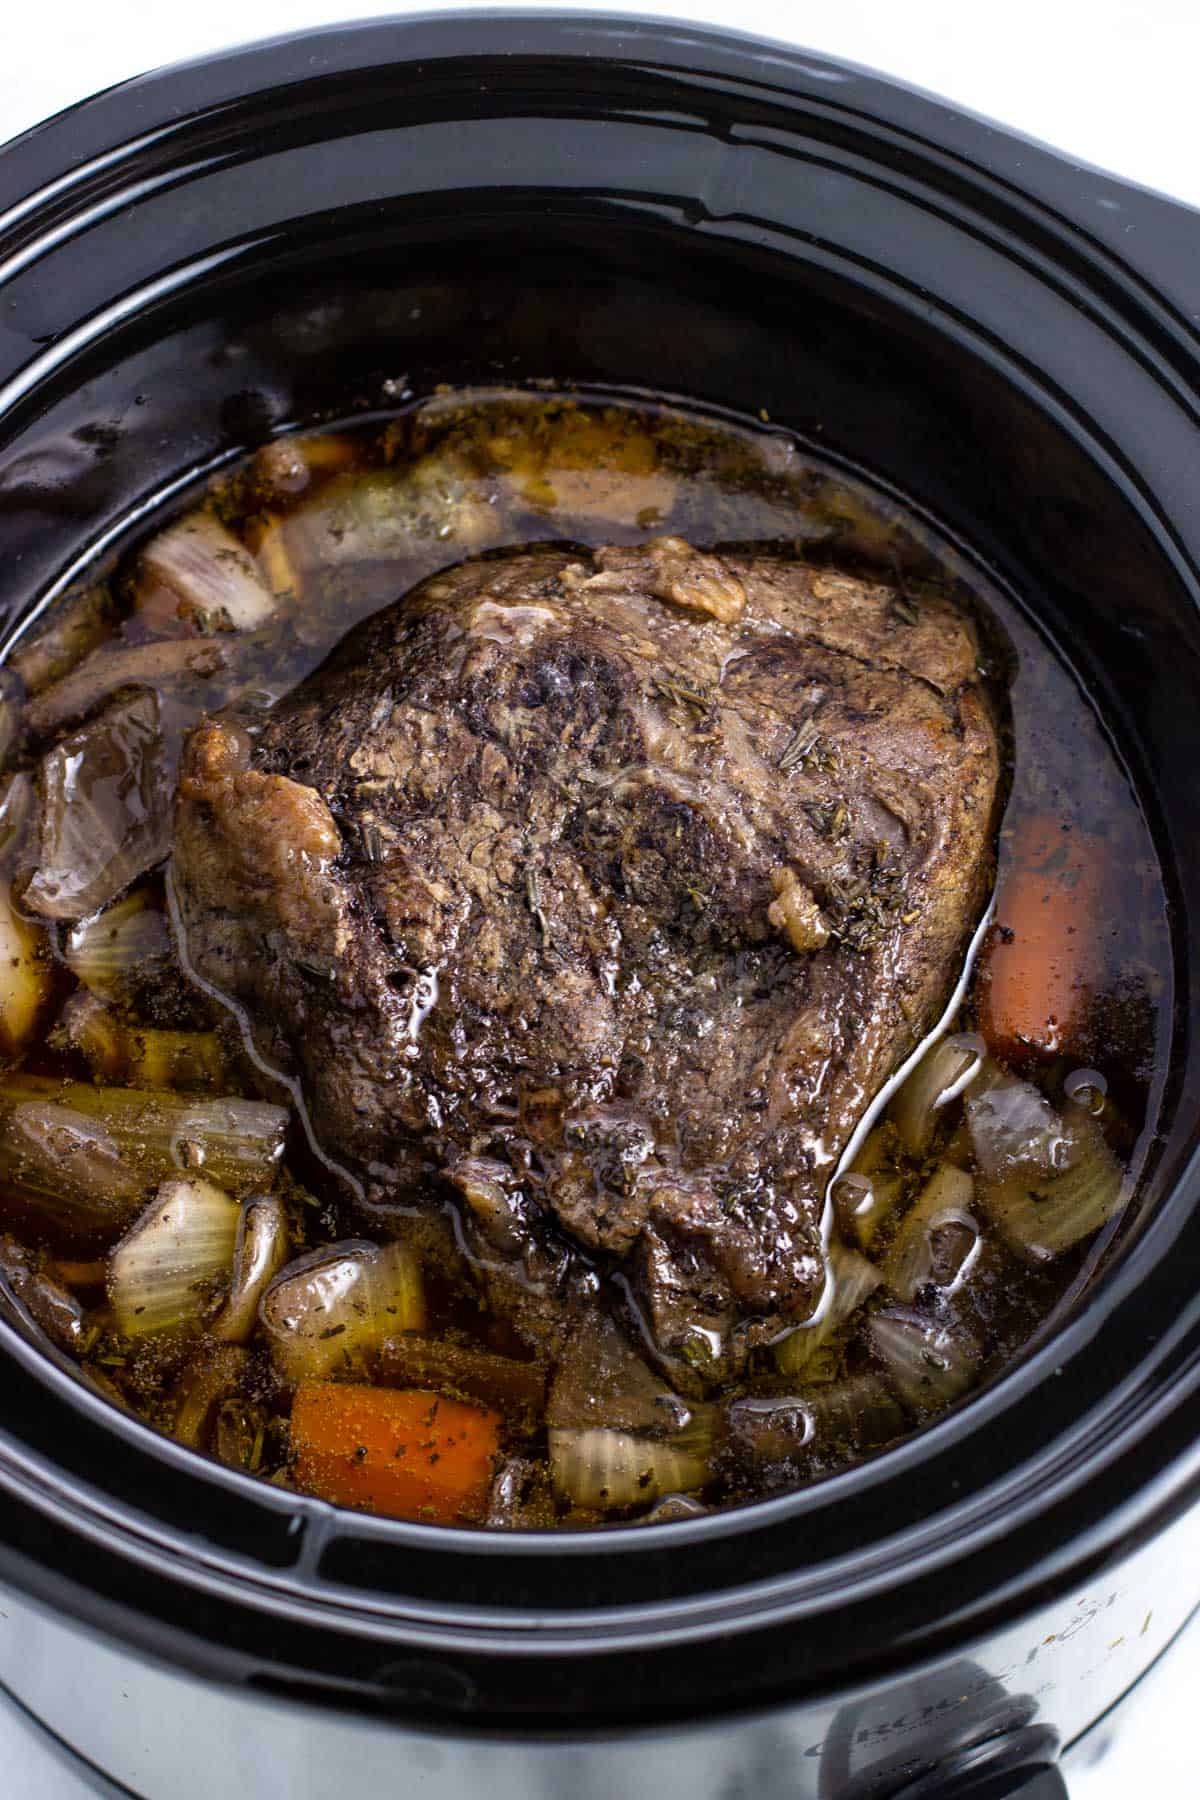 Cooked shoulder roast, vegetables, and gravy in the slow cooker.